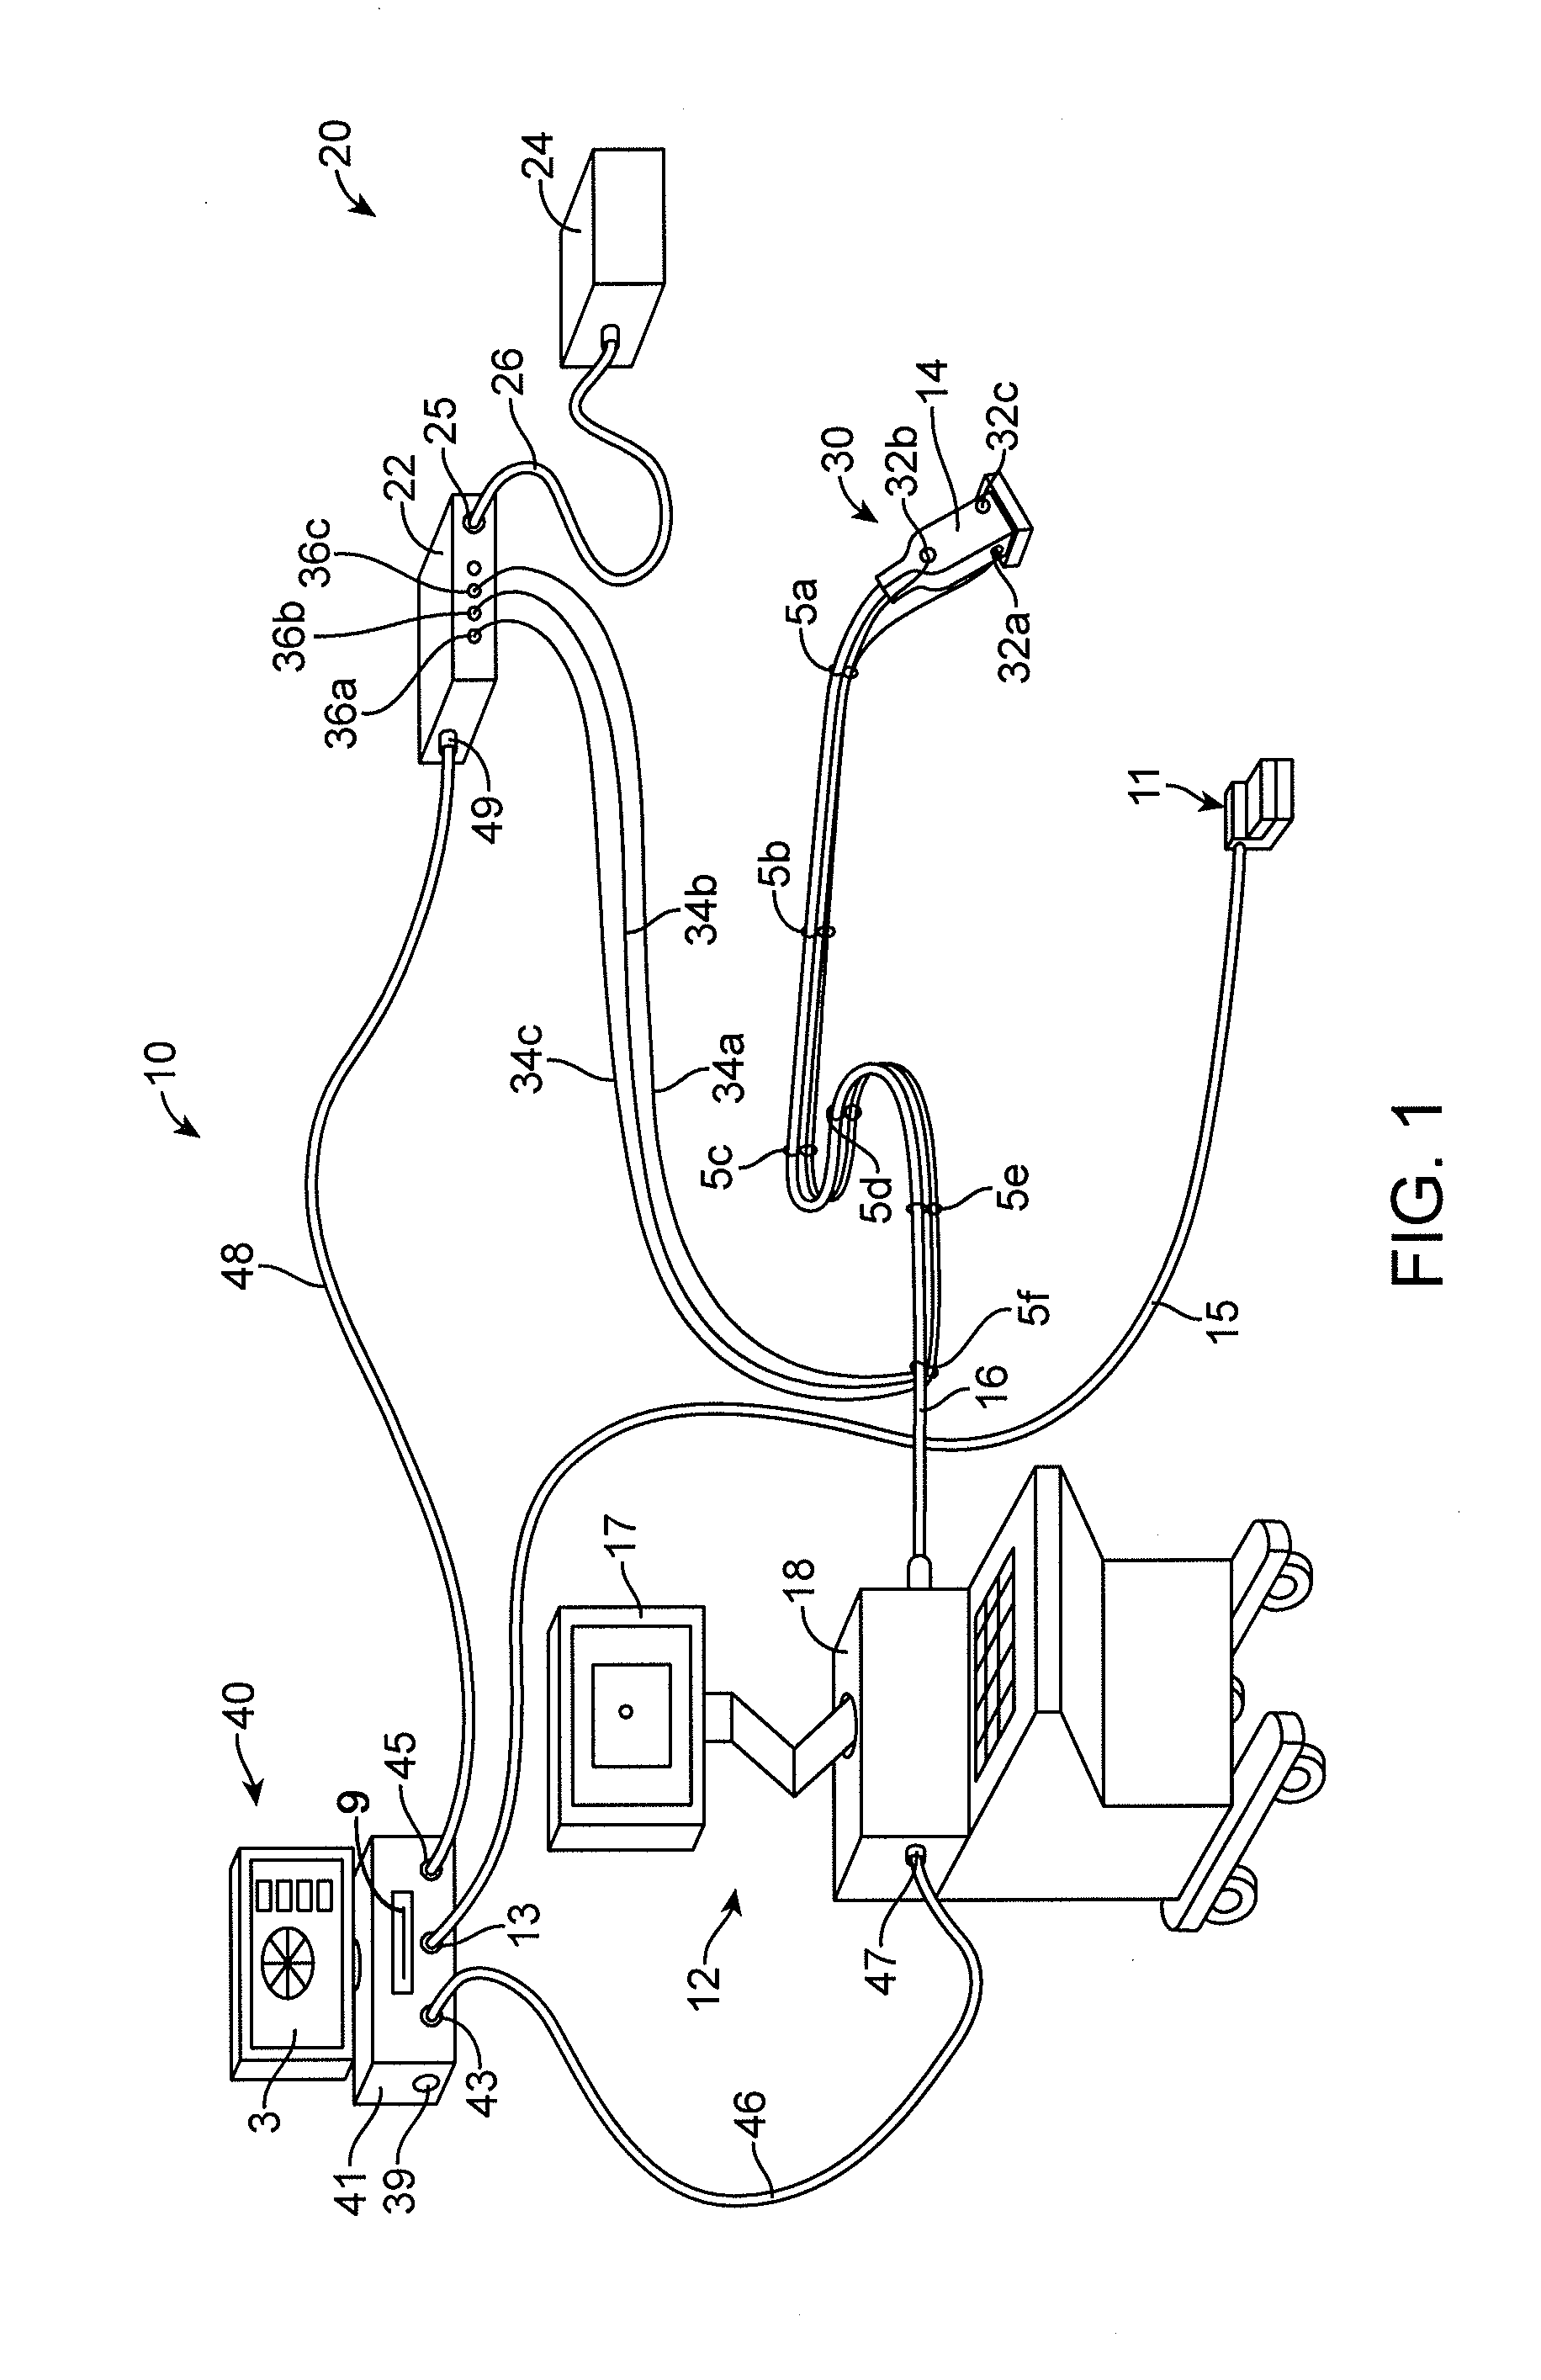 Method, apparatus and system for complete examination of tissue with hand-held imaging devices having mounted cameras